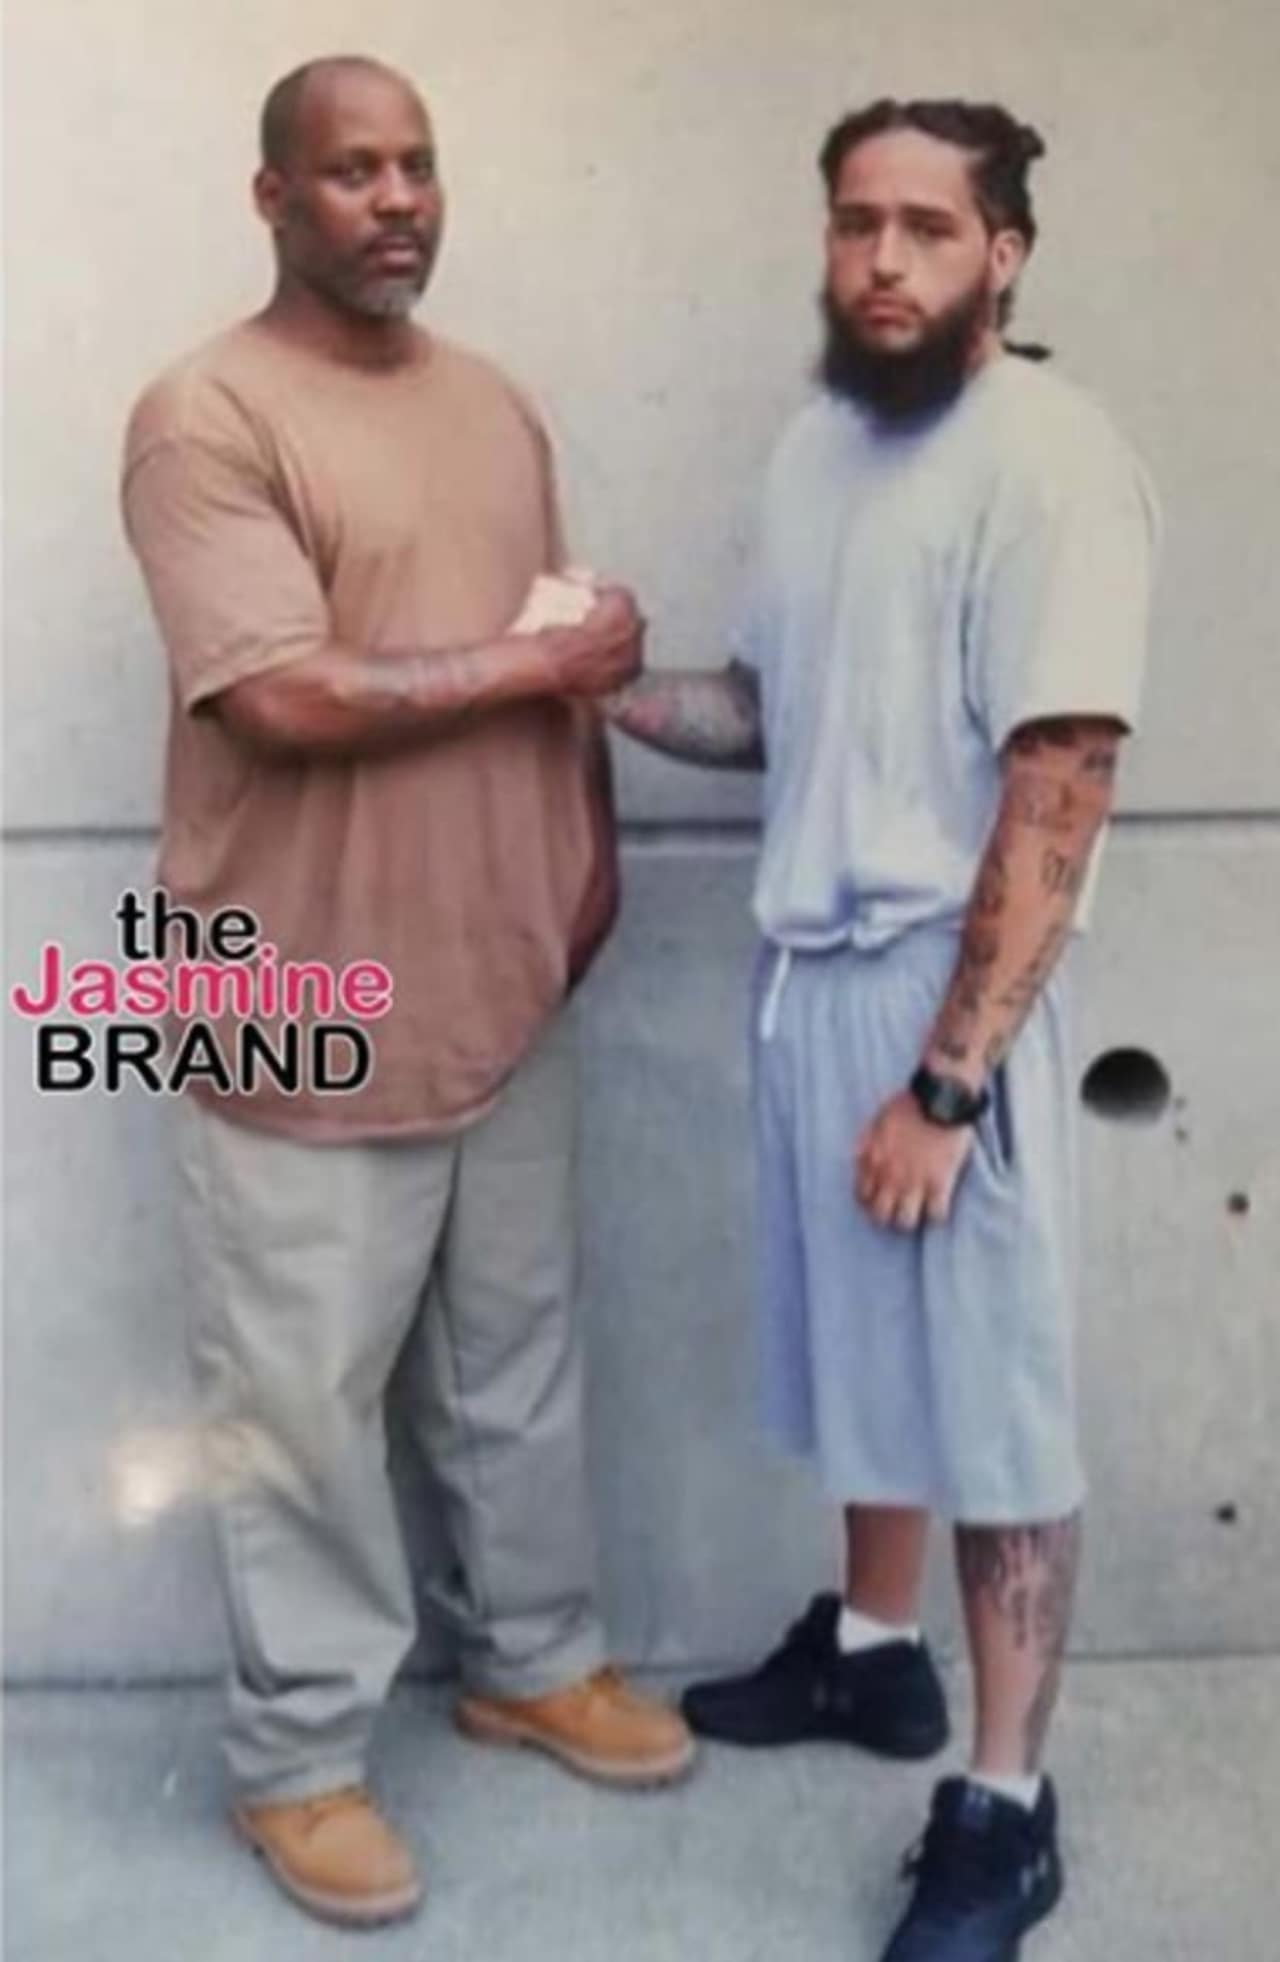 DMX (Earl Simmons), at left, with unidentified inmate.